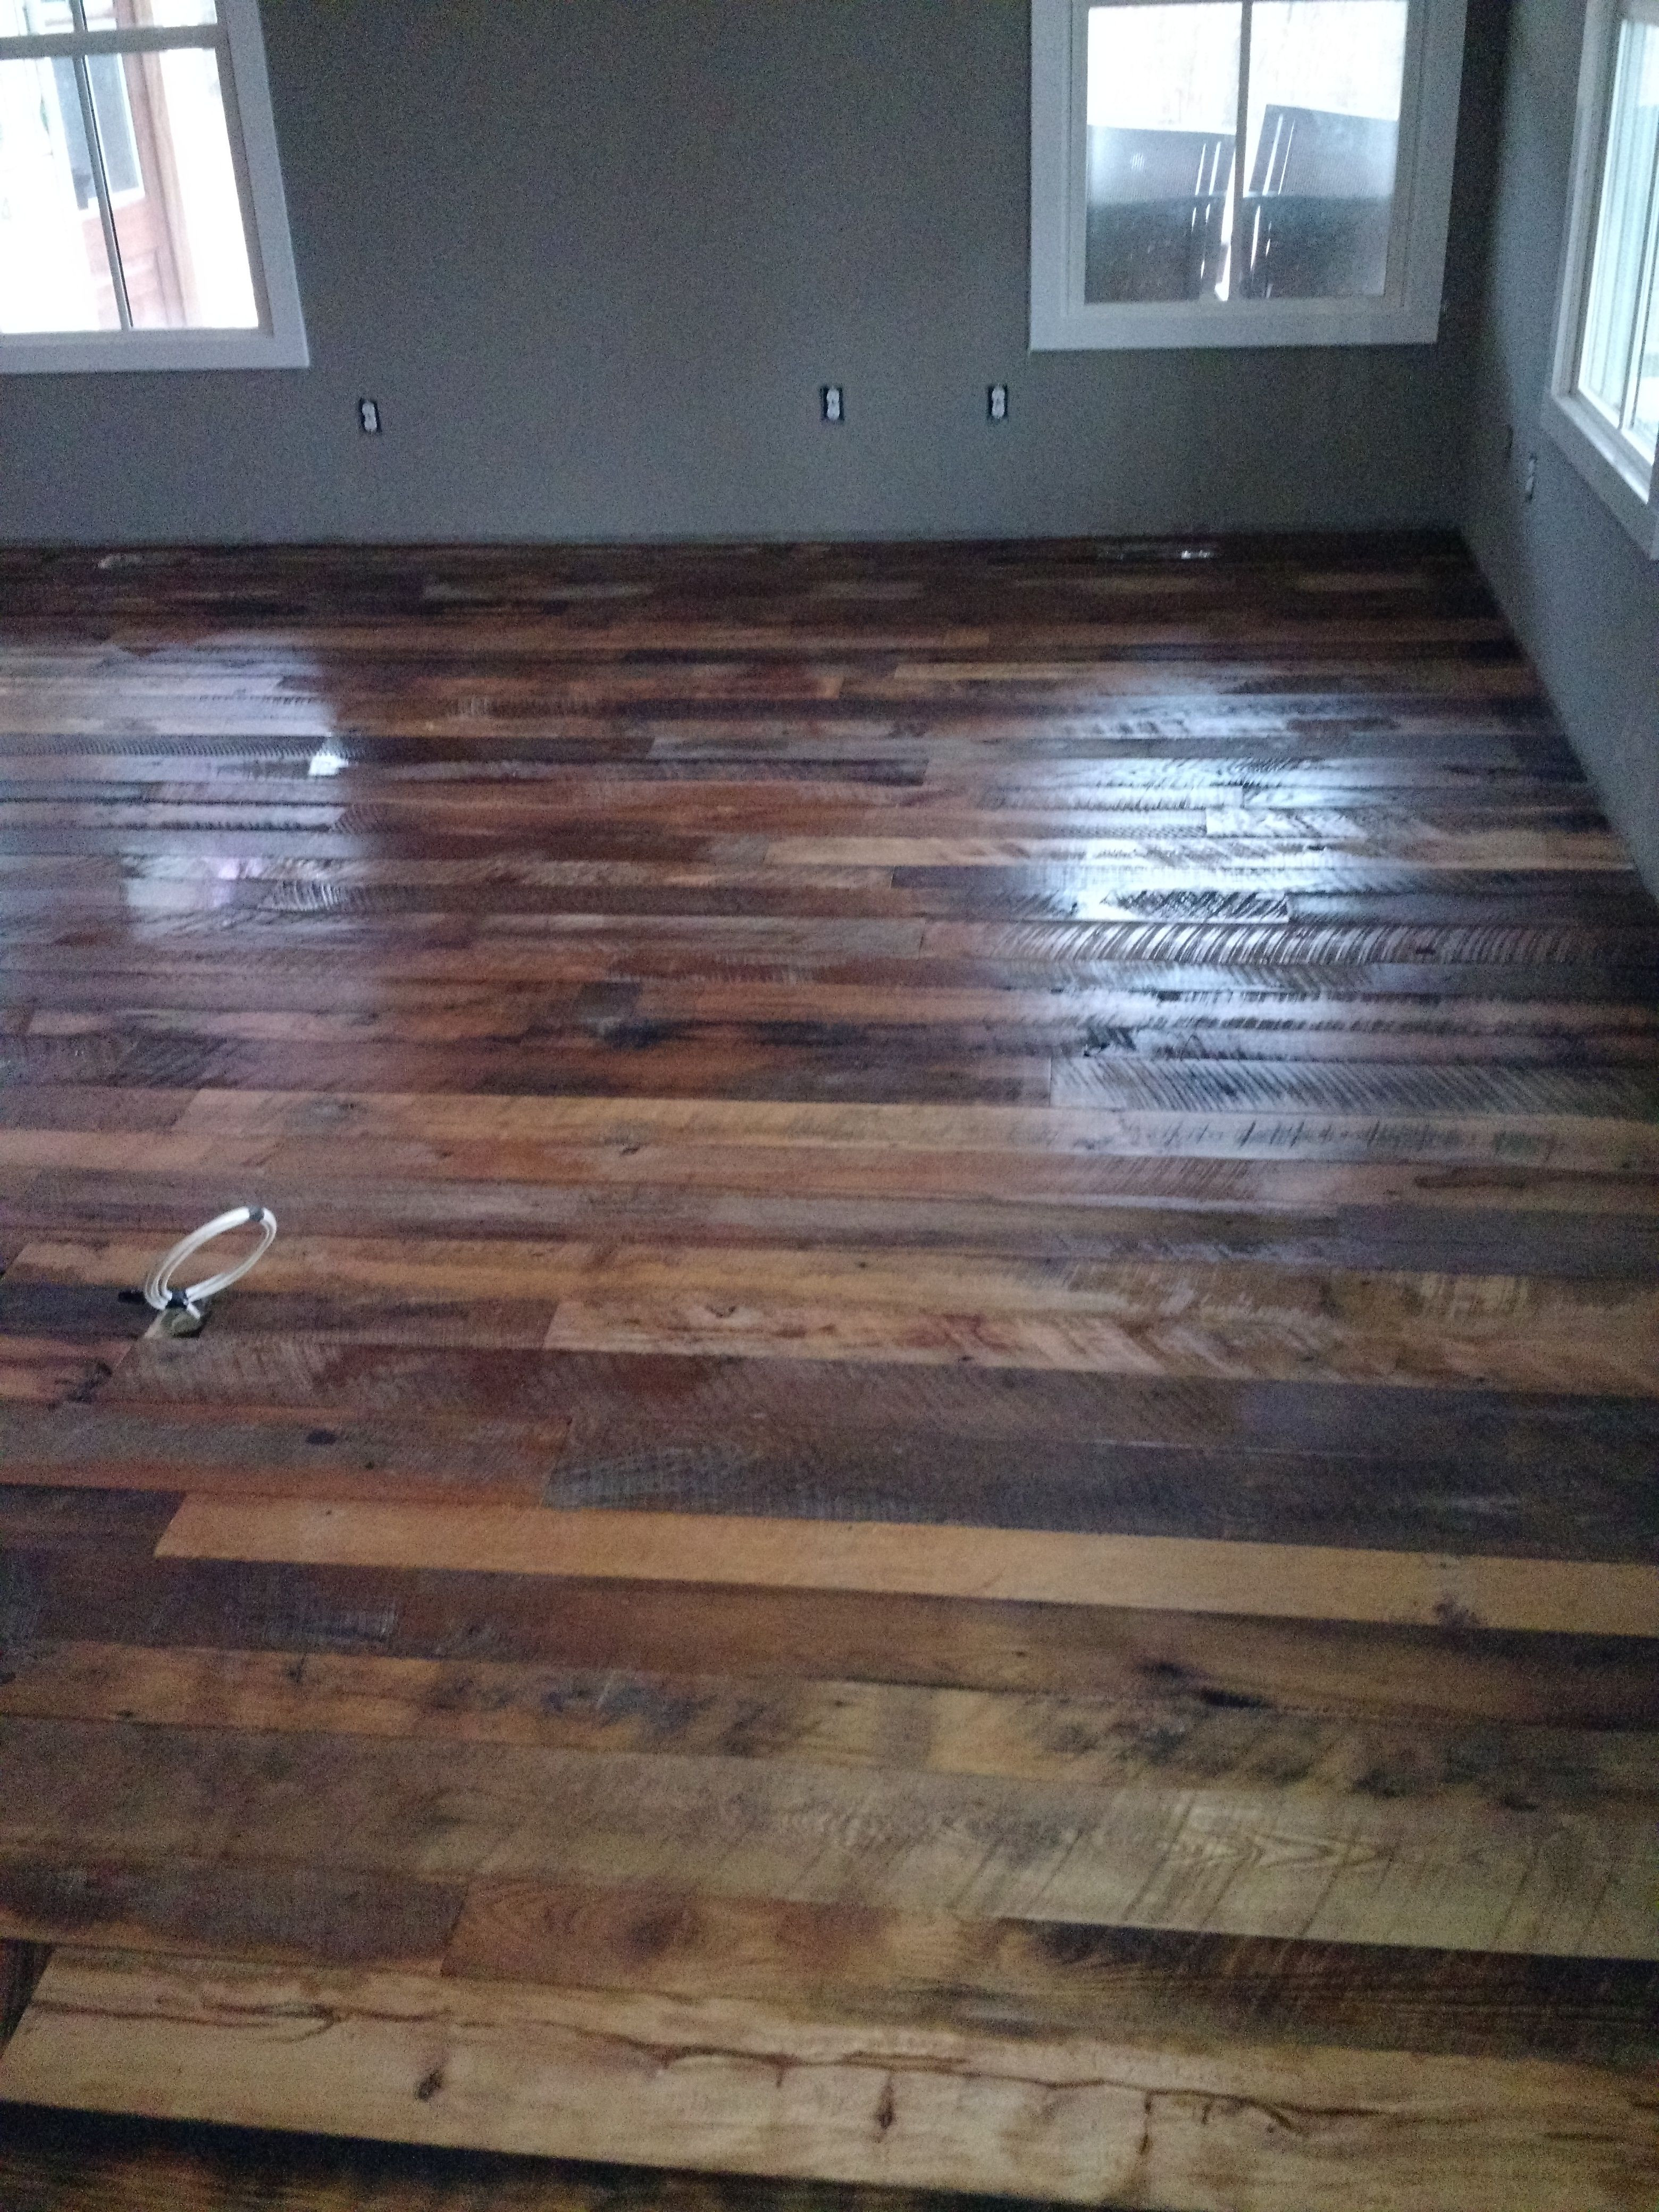 Oak or Maple Hardwood Floors which is Better Of Our Reclaimed Floor Dirty Faced Oak Hickory ash Beech Maple and Inside Our Reclaimed Floor Dirty Faced Oak Hickory ash Beech Maple and